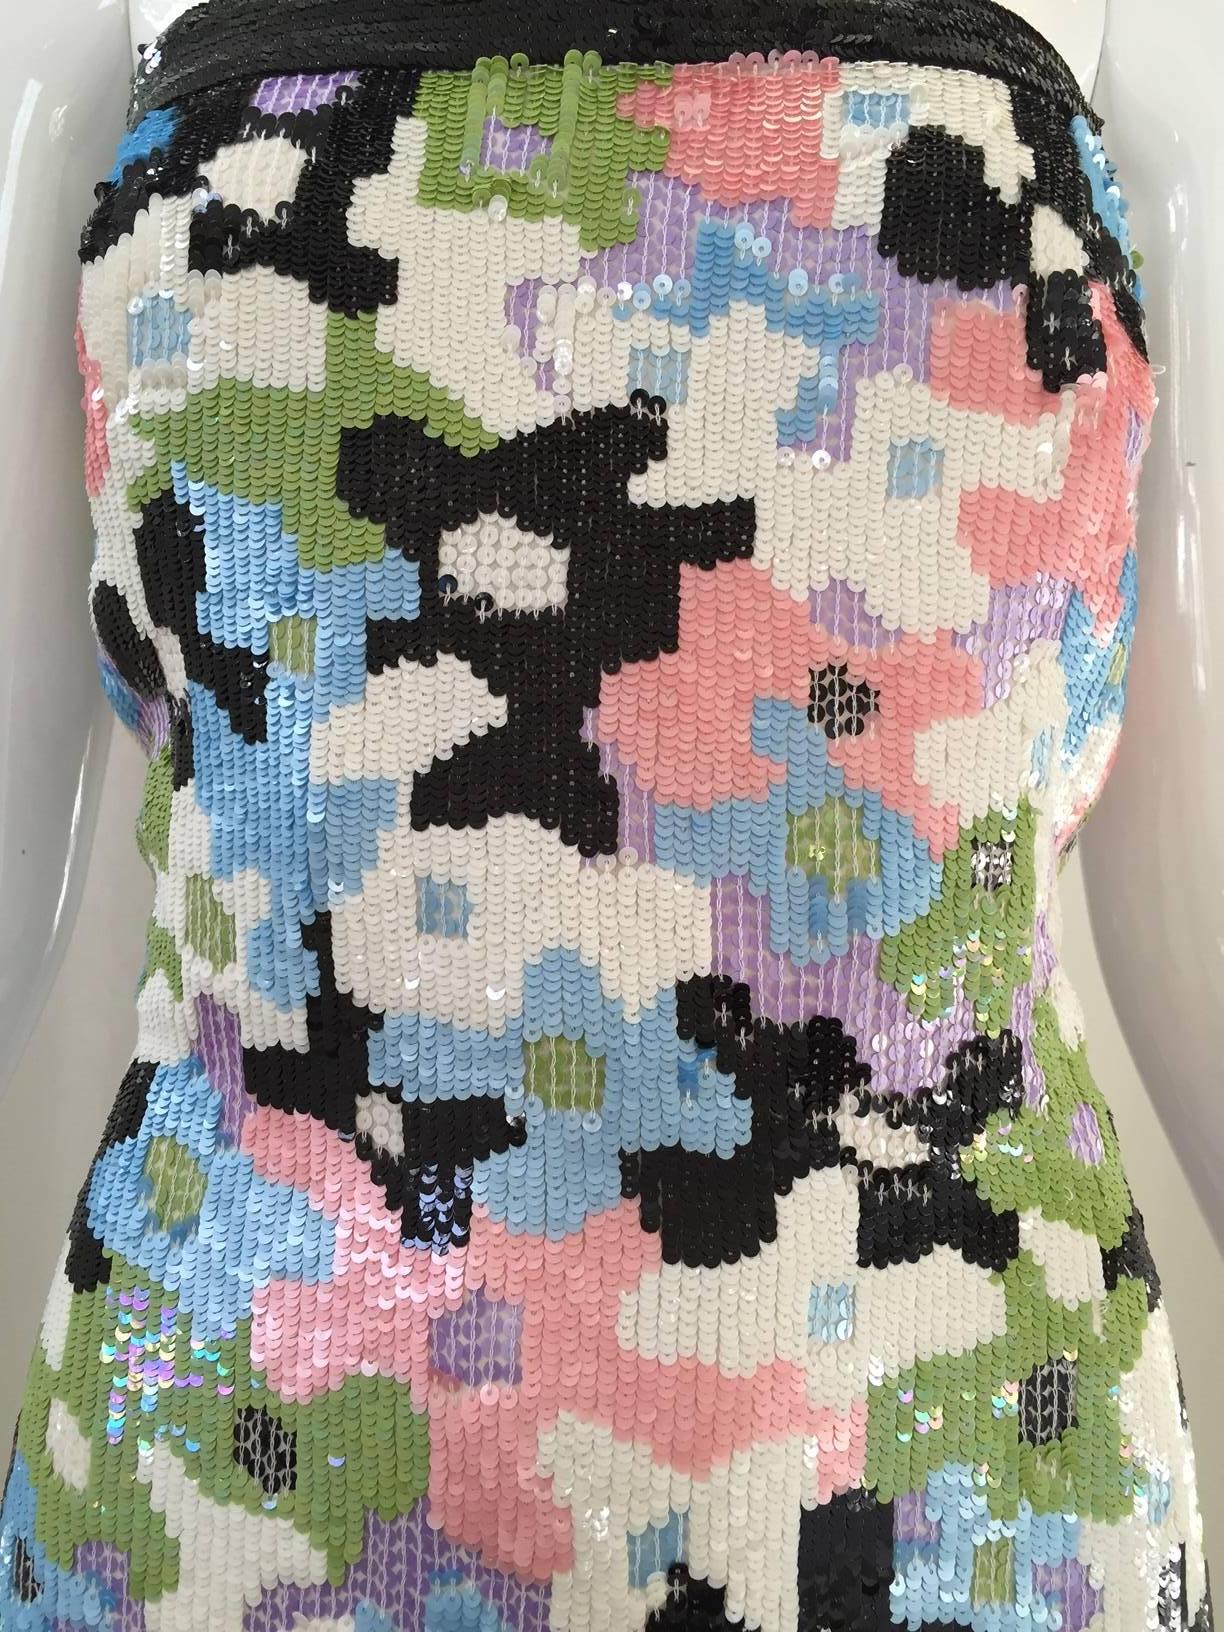 Fun Escada strapless cocktail dress in black, pink, green and blue sequin floral Phychedelic print
Bust: 36